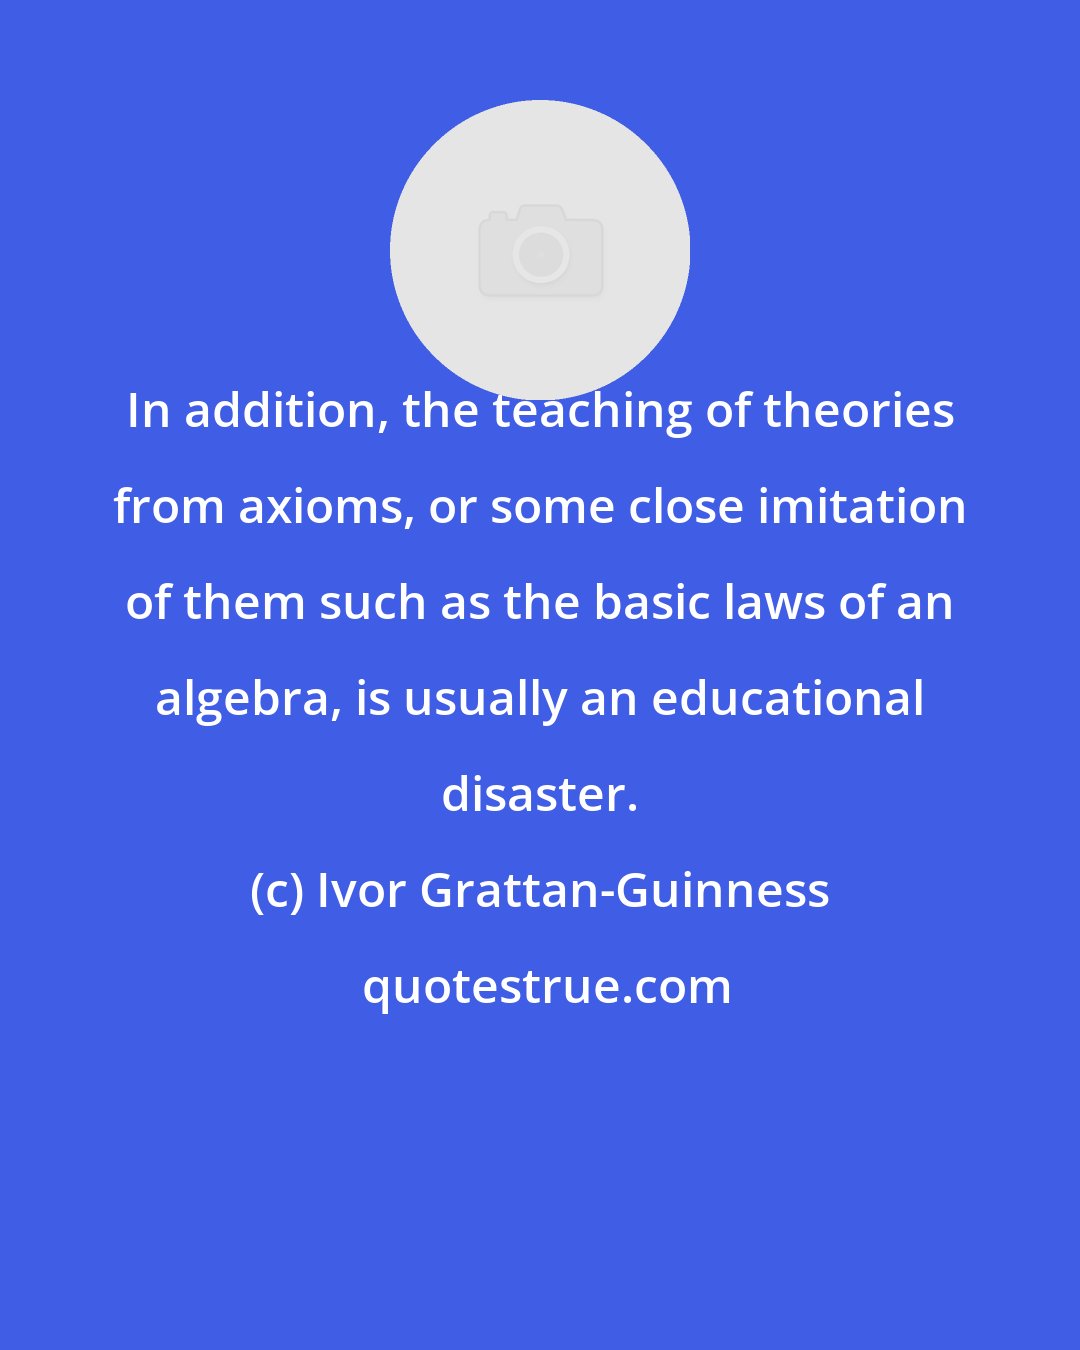 Ivor Grattan-Guinness: In addition, the teaching of theories from axioms, or some close imitation of them such as the basic laws of an algebra, is usually an educational disaster.